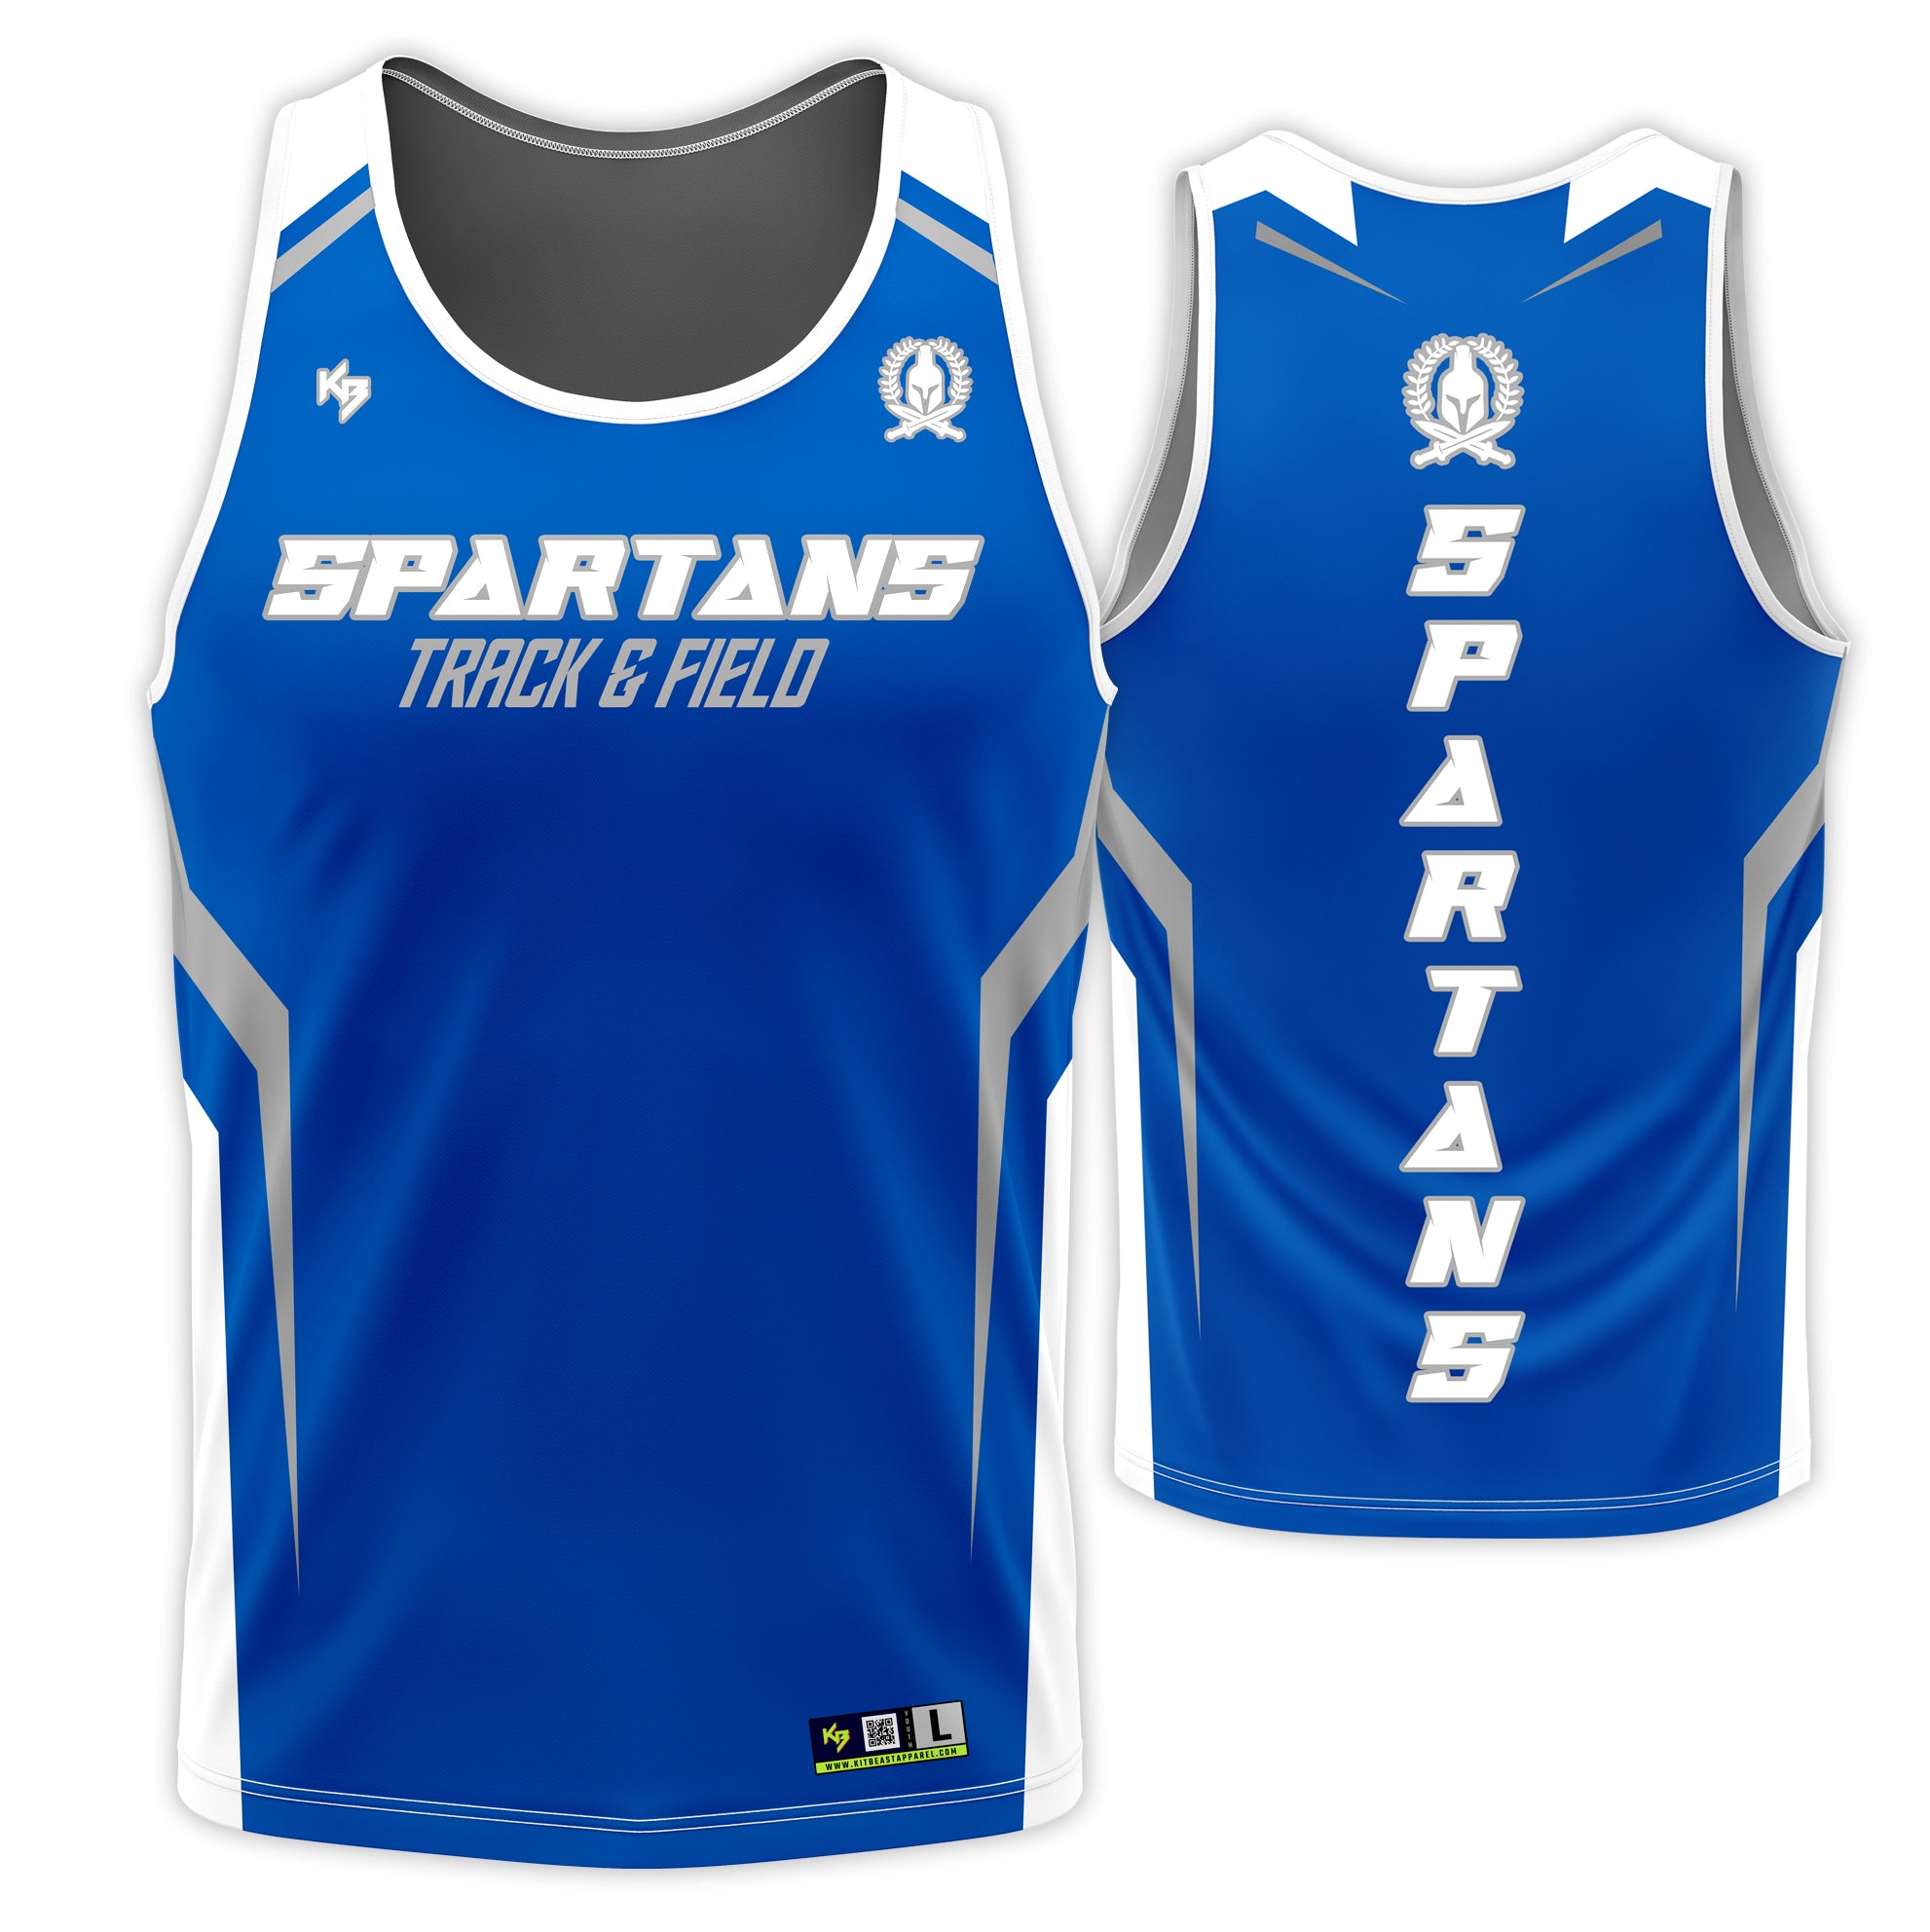 Spartans track and field jersey